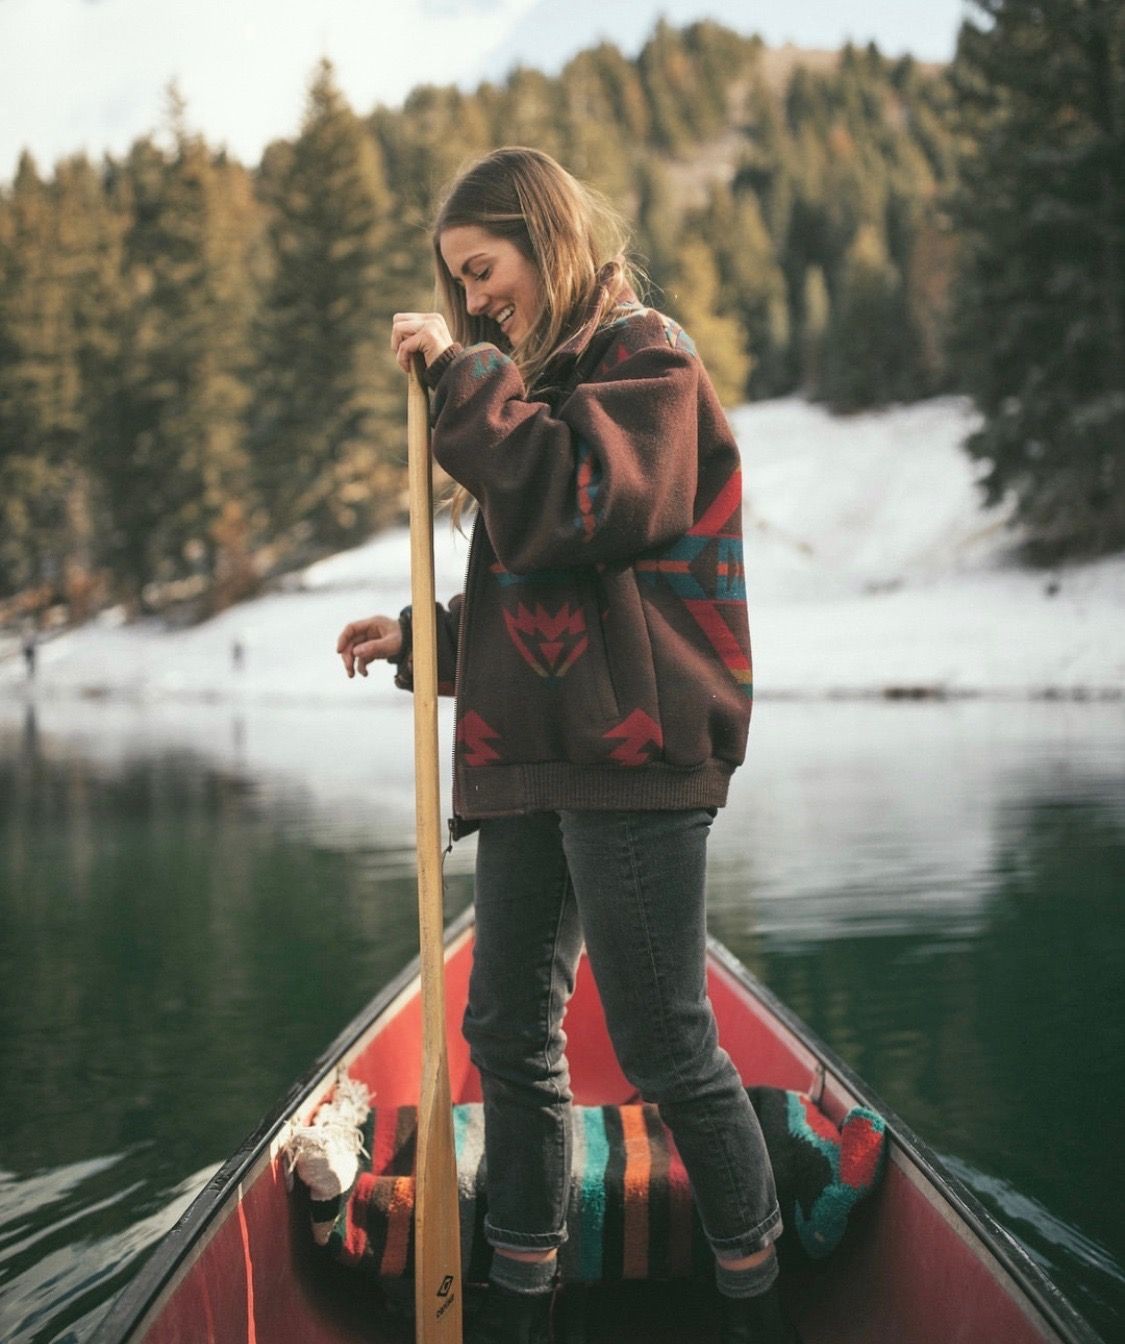 Beautiful clothing ideas outdoors aesthetic outfits, fashion photography, outdoor clothing